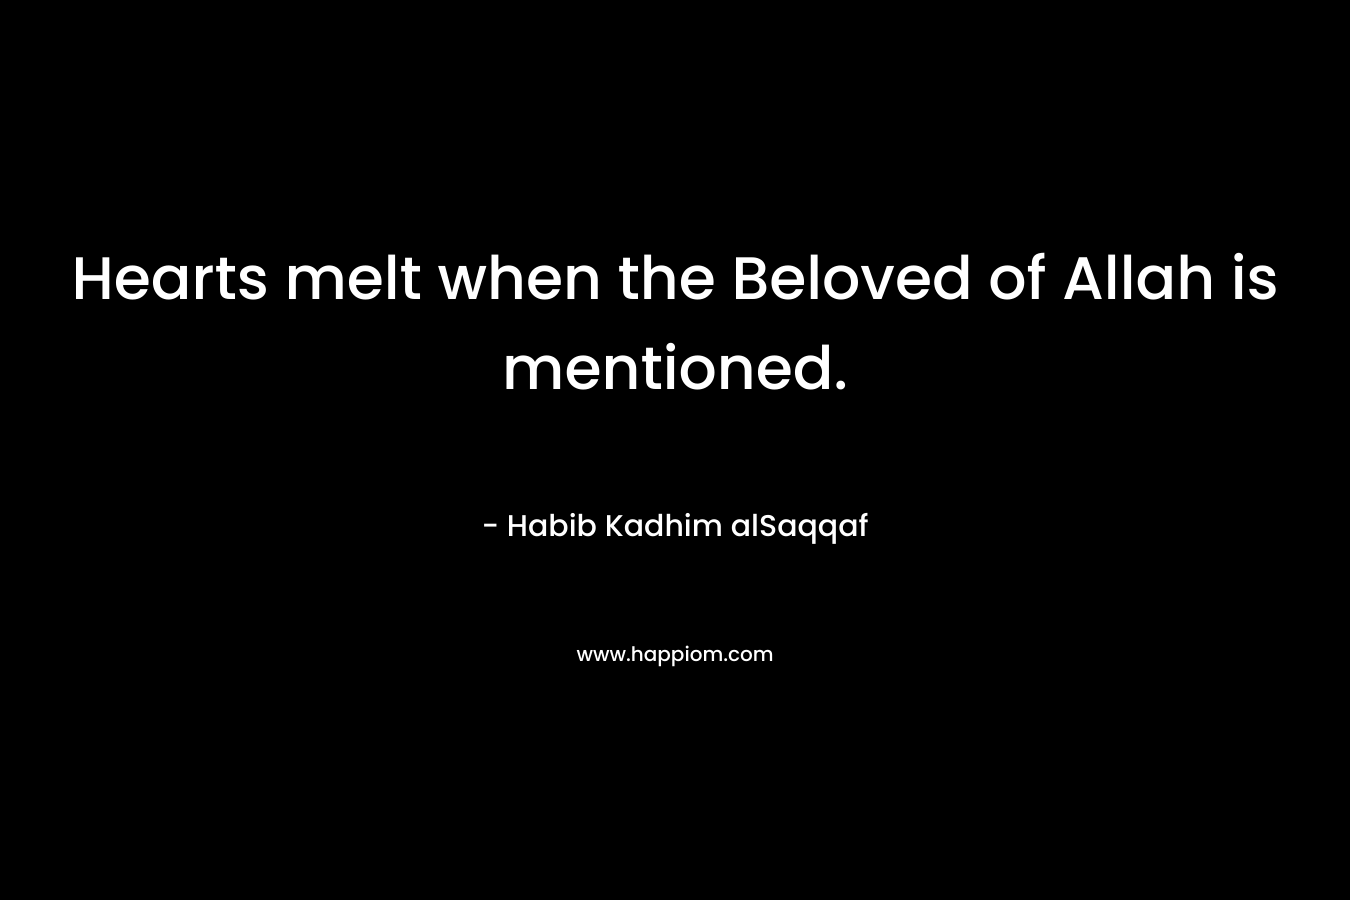 Hearts melt when the Beloved of Allah is mentioned. – Habib Kadhim alSaqqaf